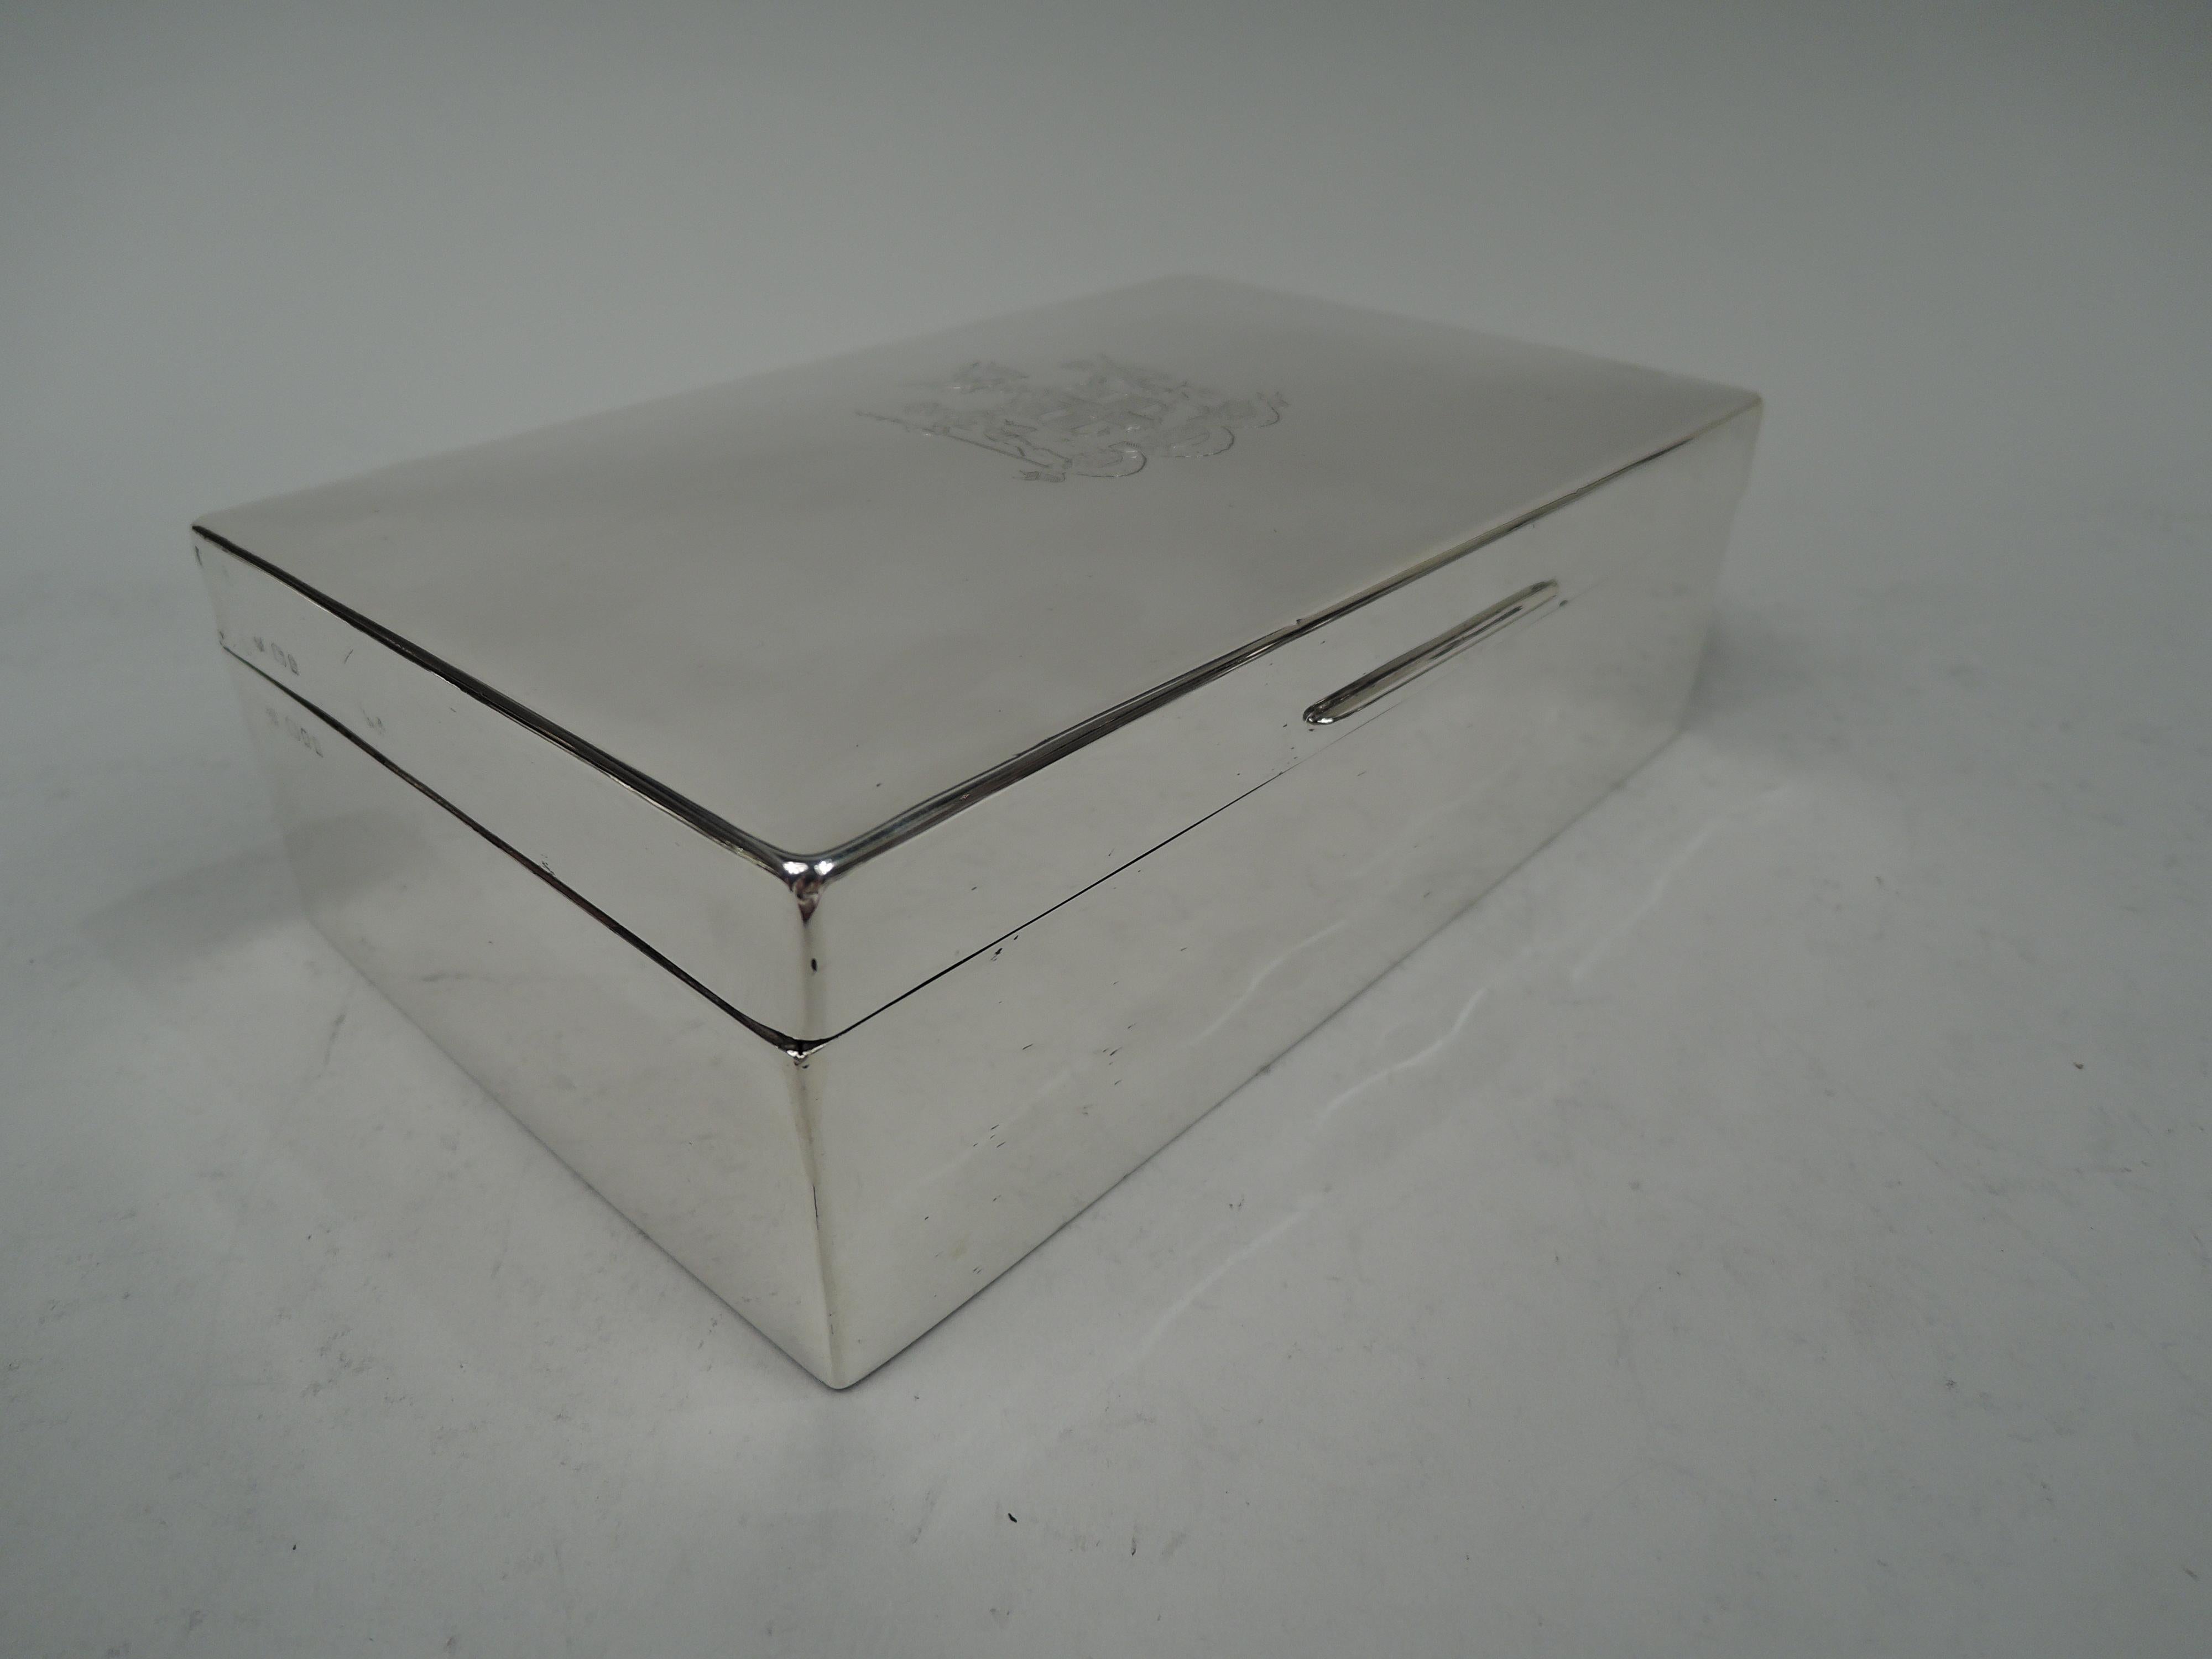 George V sterling silver box. Made by Richard Comyns in London in 1934. Rectangular with straight sides and curved corners. Cover hinged with gently curved top and tapering tab. On cover top is engraved the coat of arms of the Honourable Artillery